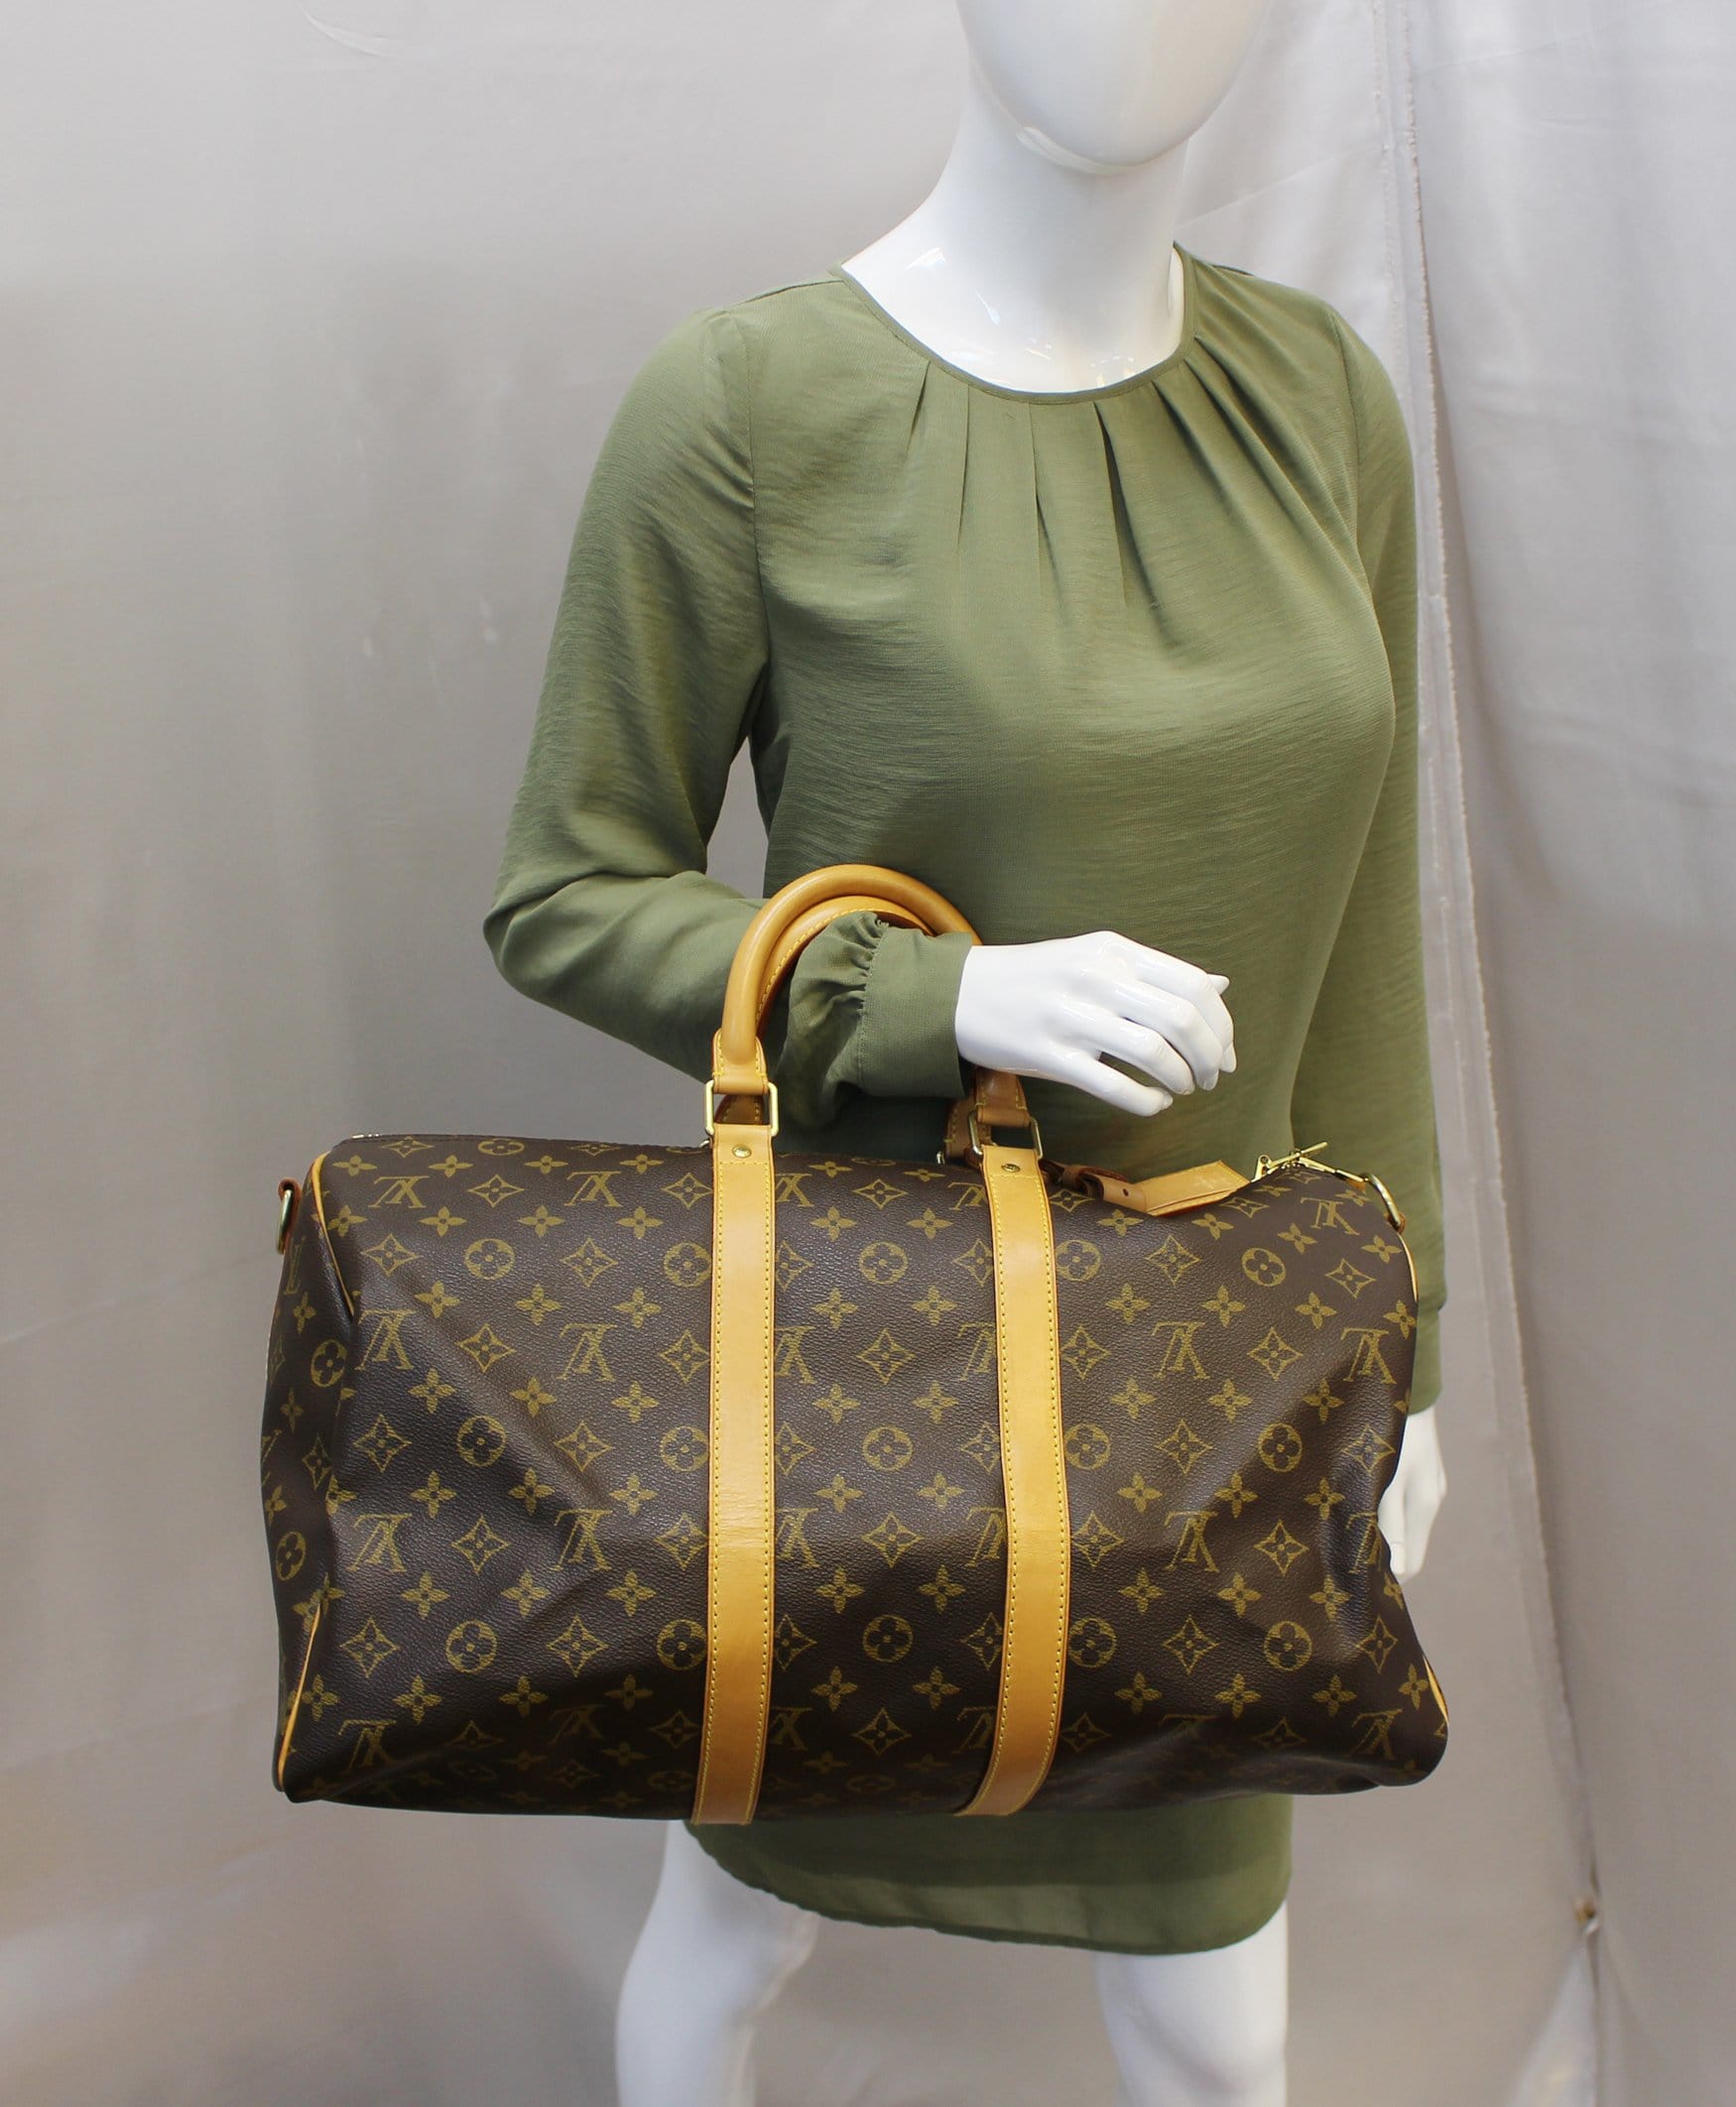 Authentic Louis Vuitton Keepall 45 Travel Bag – Relics to Rhinestones